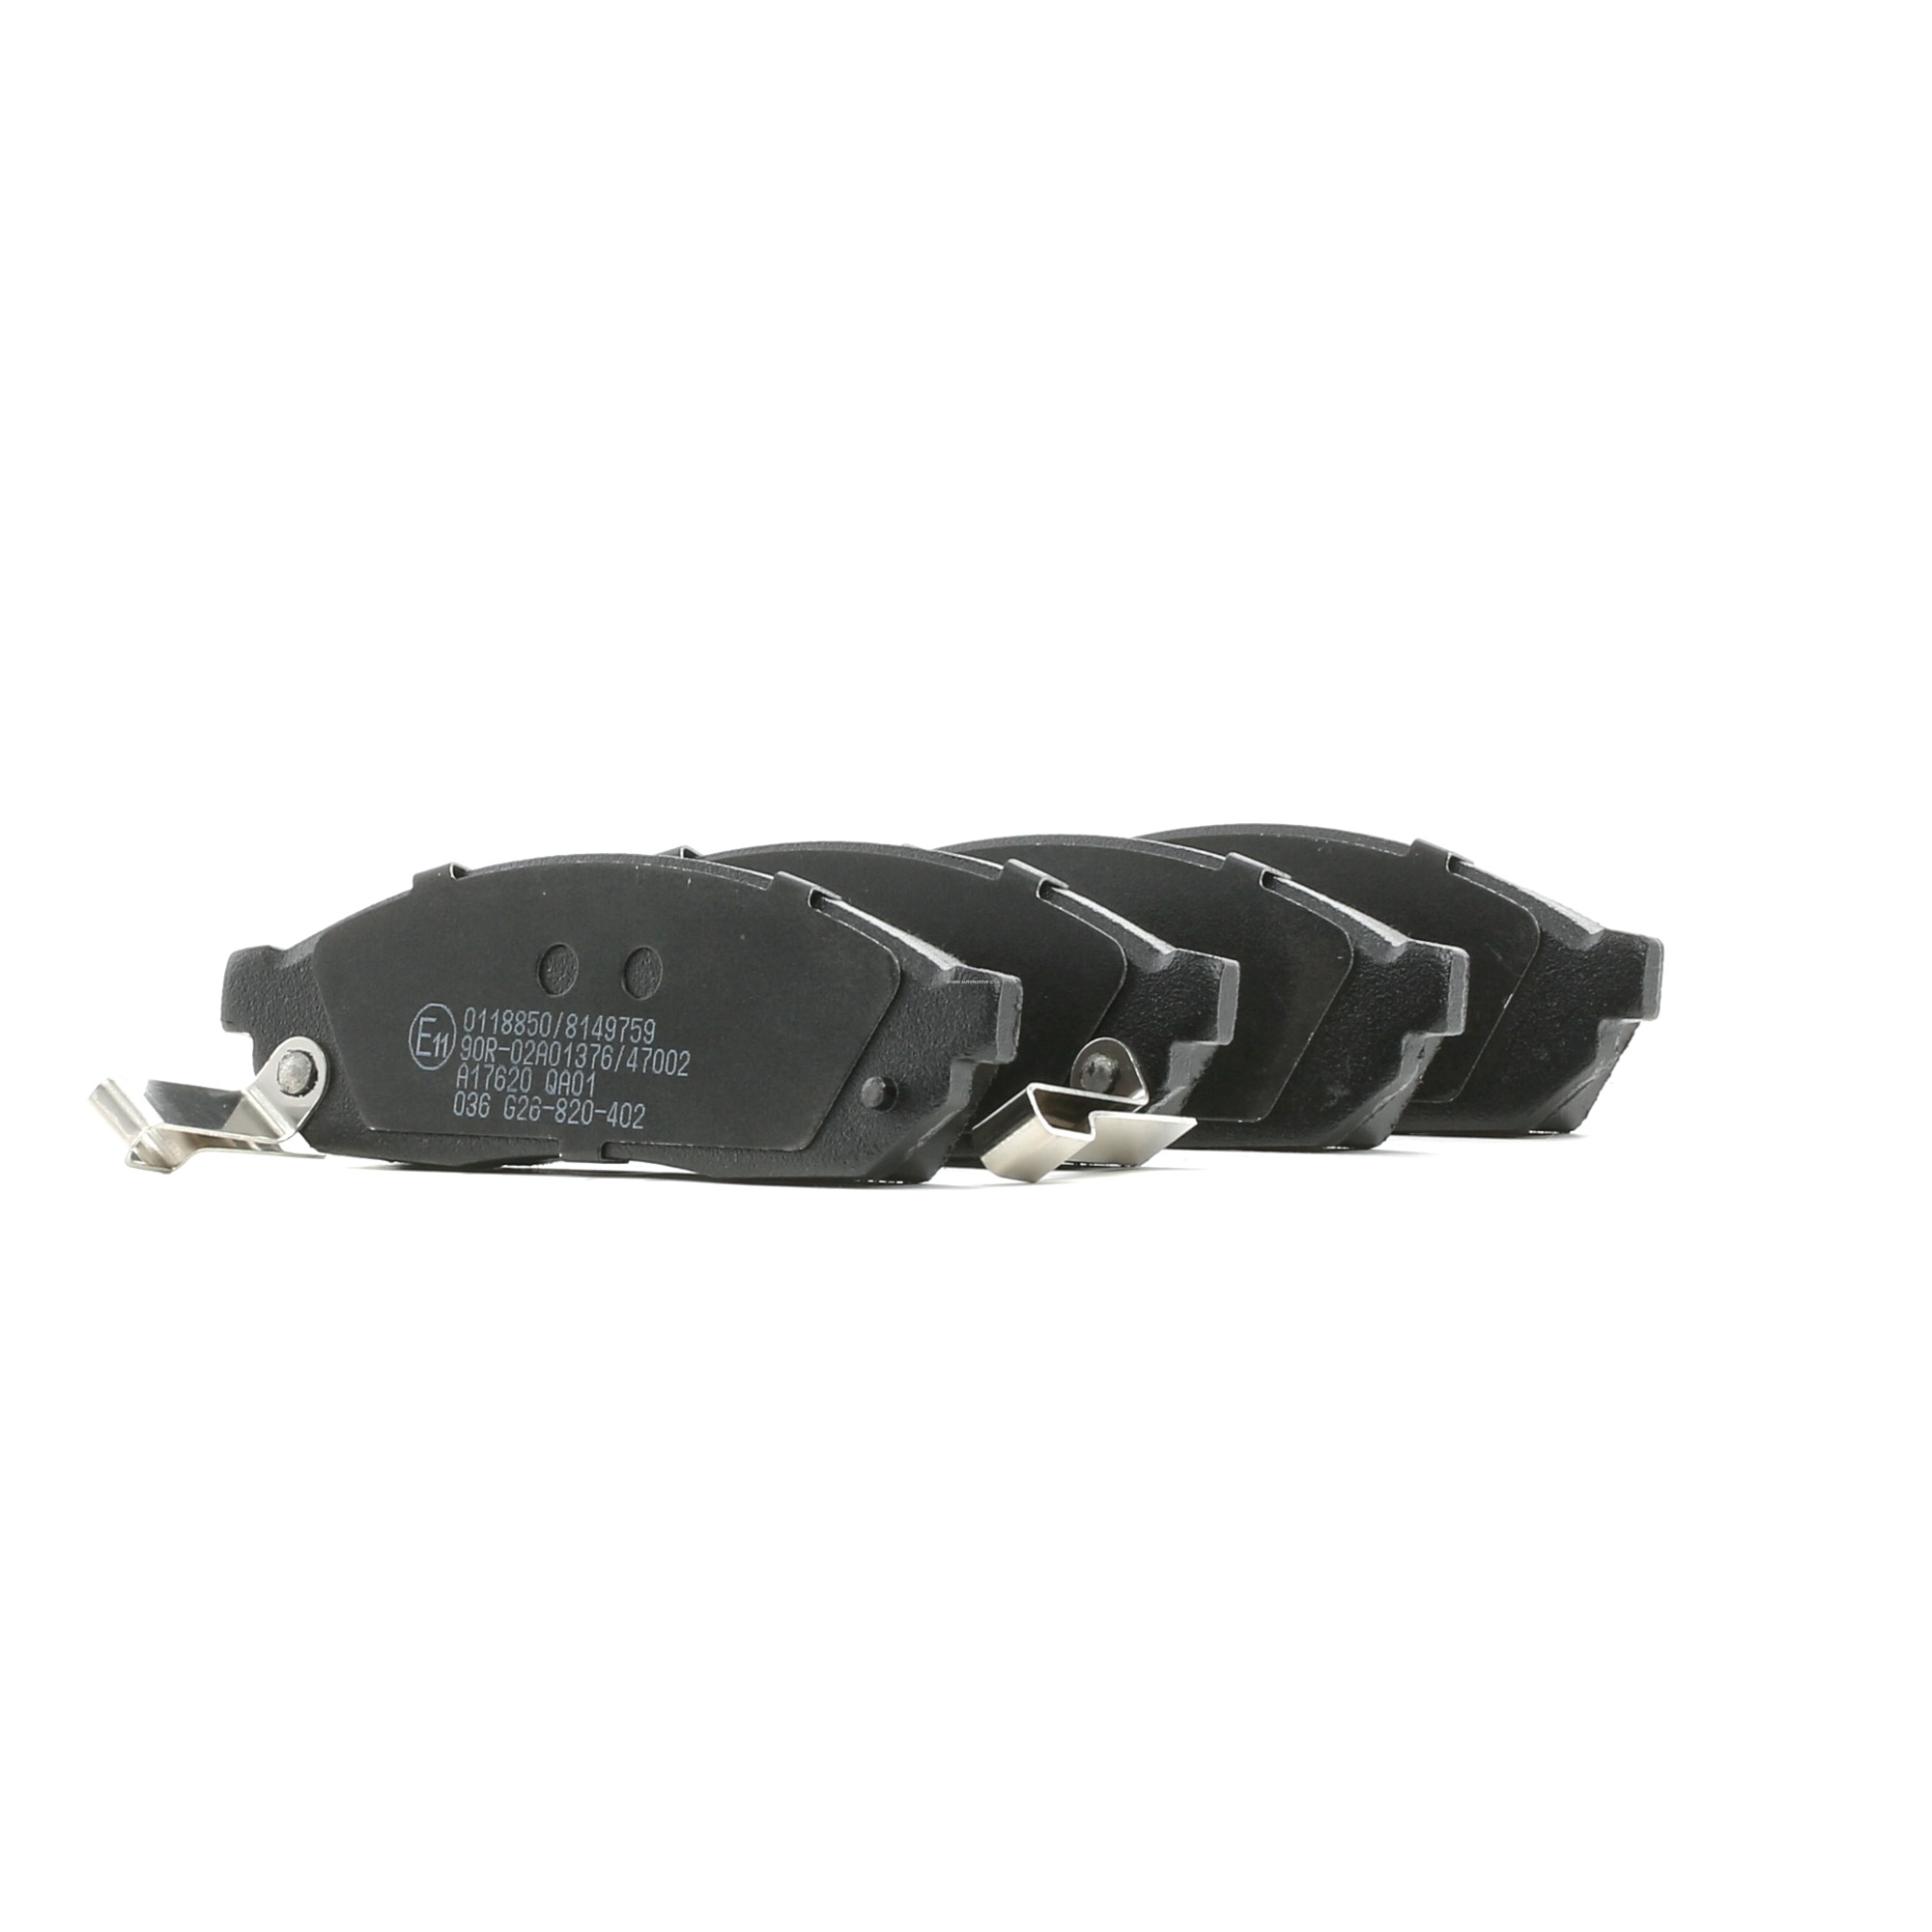 STARK Front Axle Height 2: 38mm, Height: 38mm, Thickness 1: 15mm, Thickness 2: 15mm Brake pads SKBP-0011604 buy